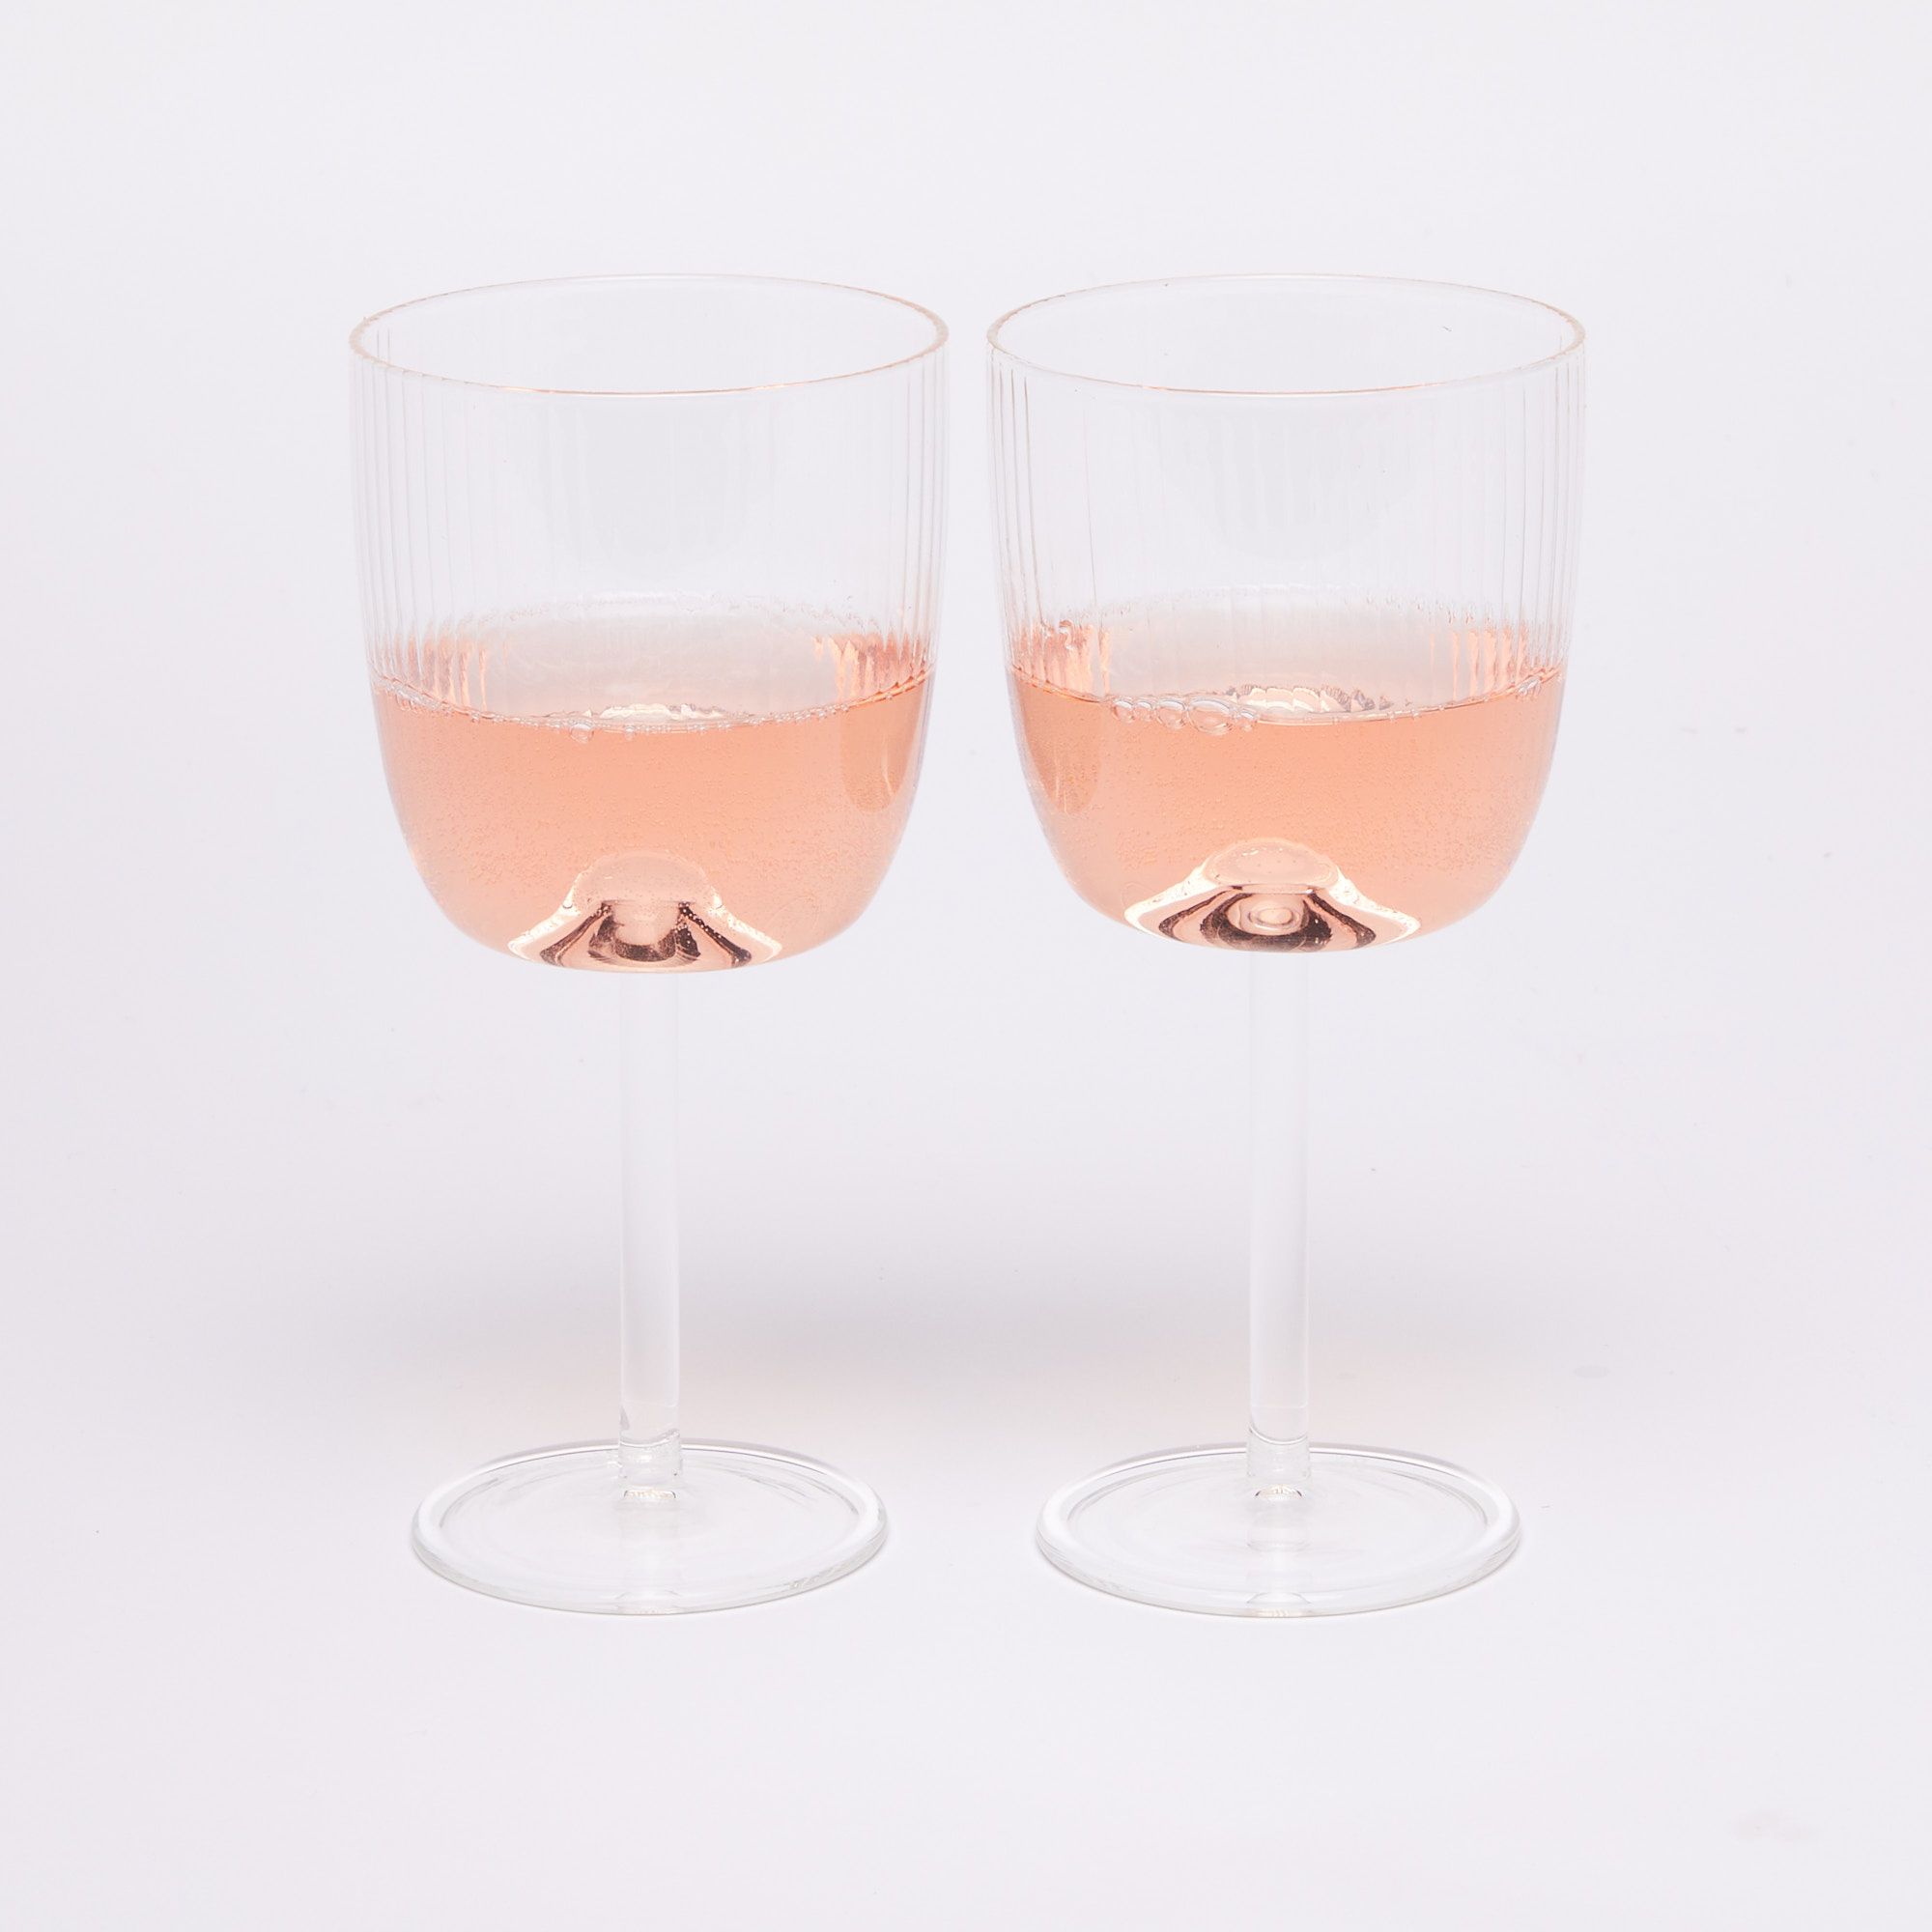 Two wine glasses with pink wine half full